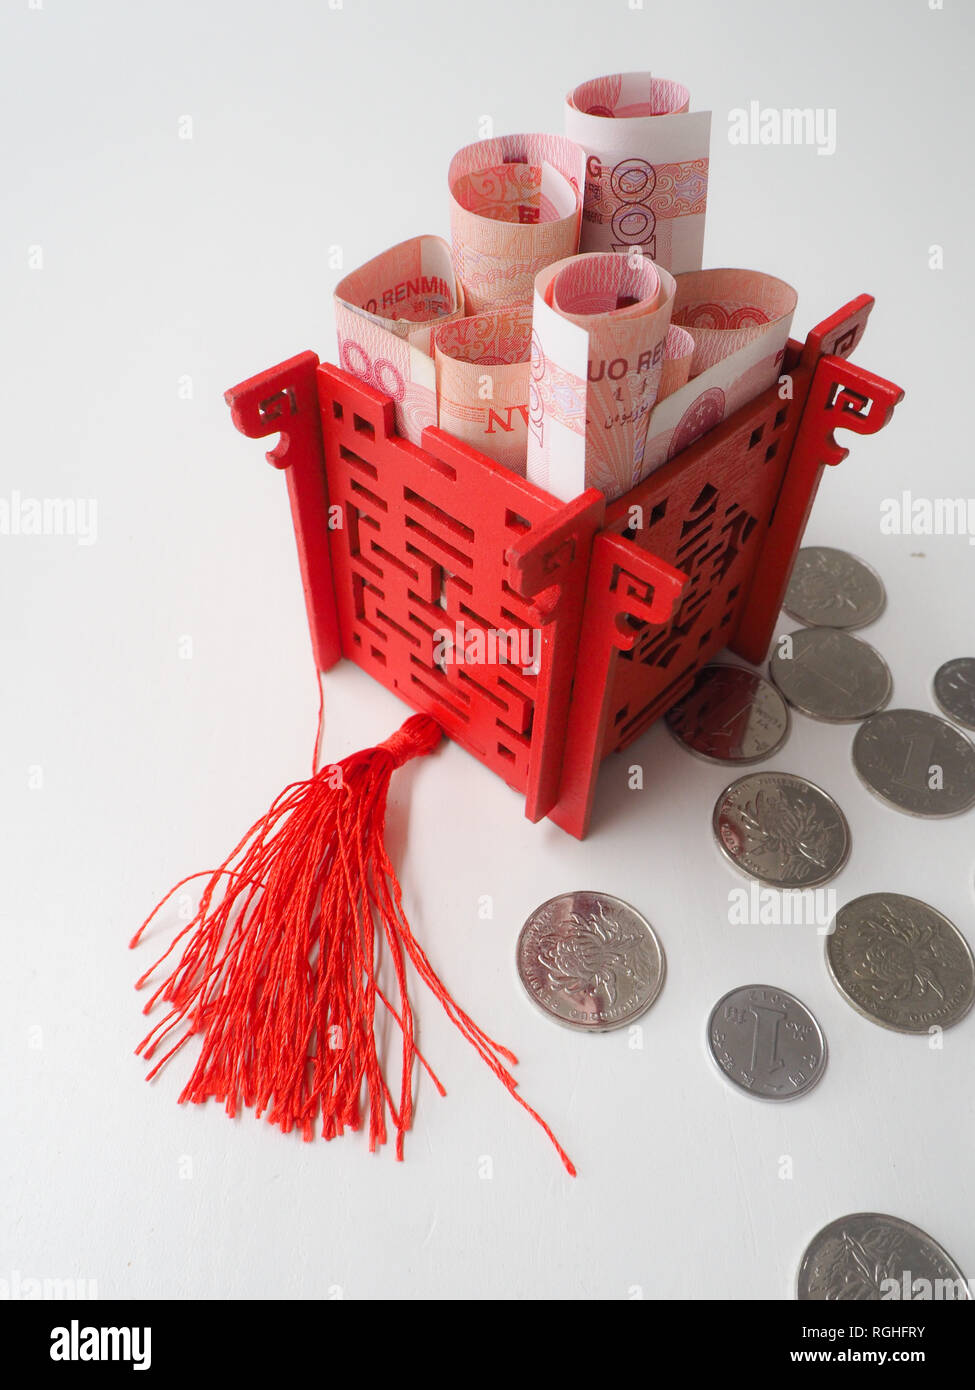 Miniature Chinese pavilion in bright red filled with Chinese 100 renminbi banknotes and surrounded by 1 yuan coins Stock Photo